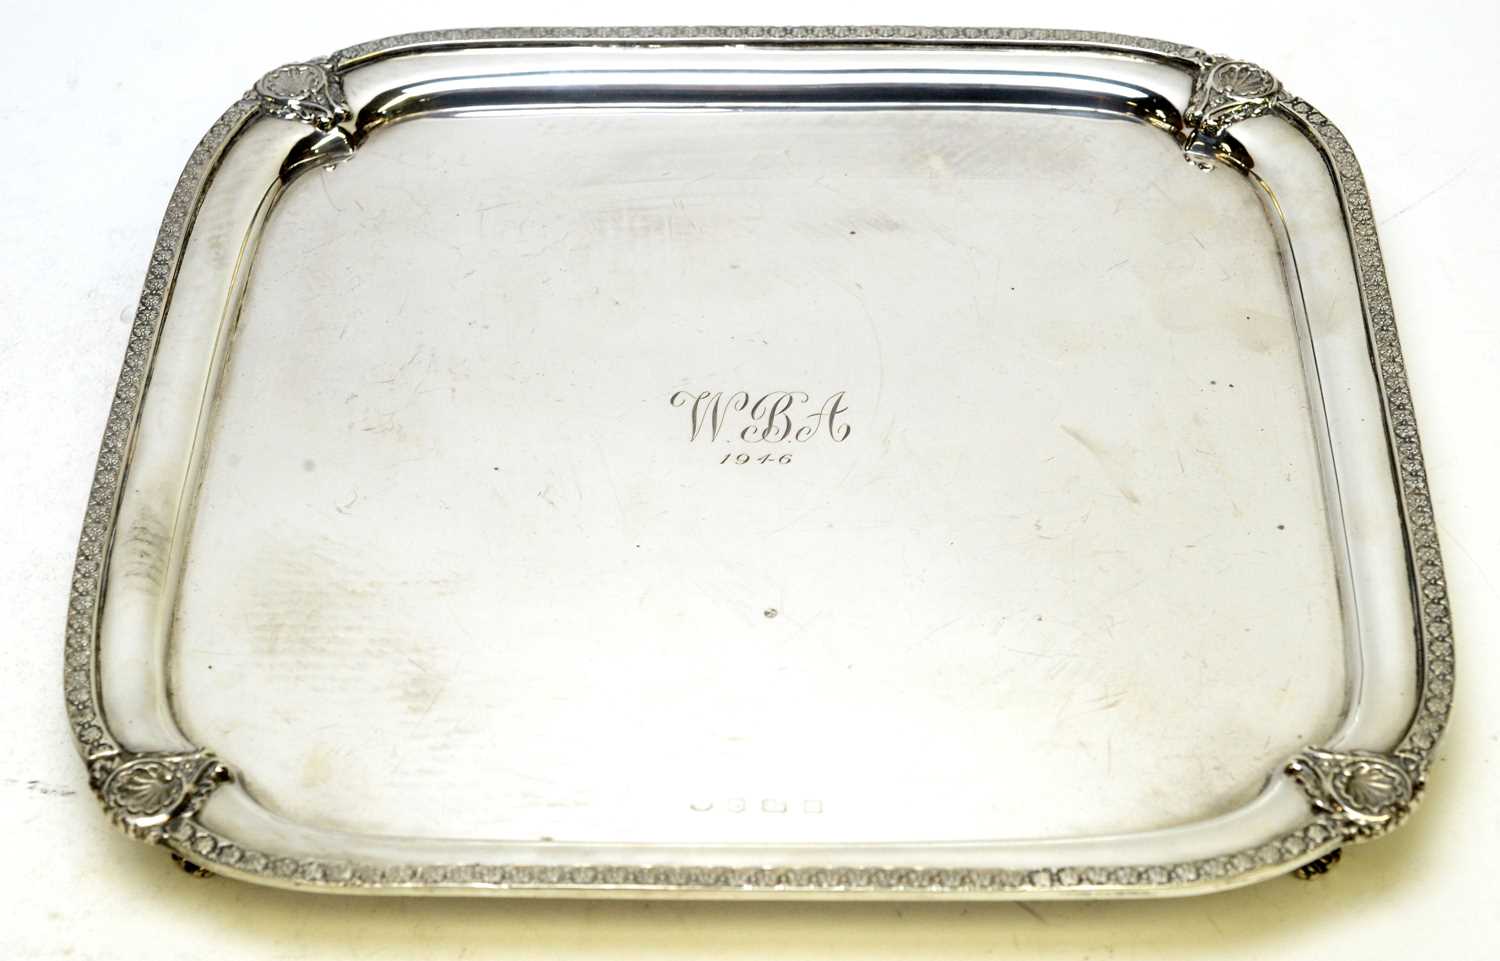 Lot 526 - An Edward VIII silver salver, by The Alexander Clark Manufacturing Co